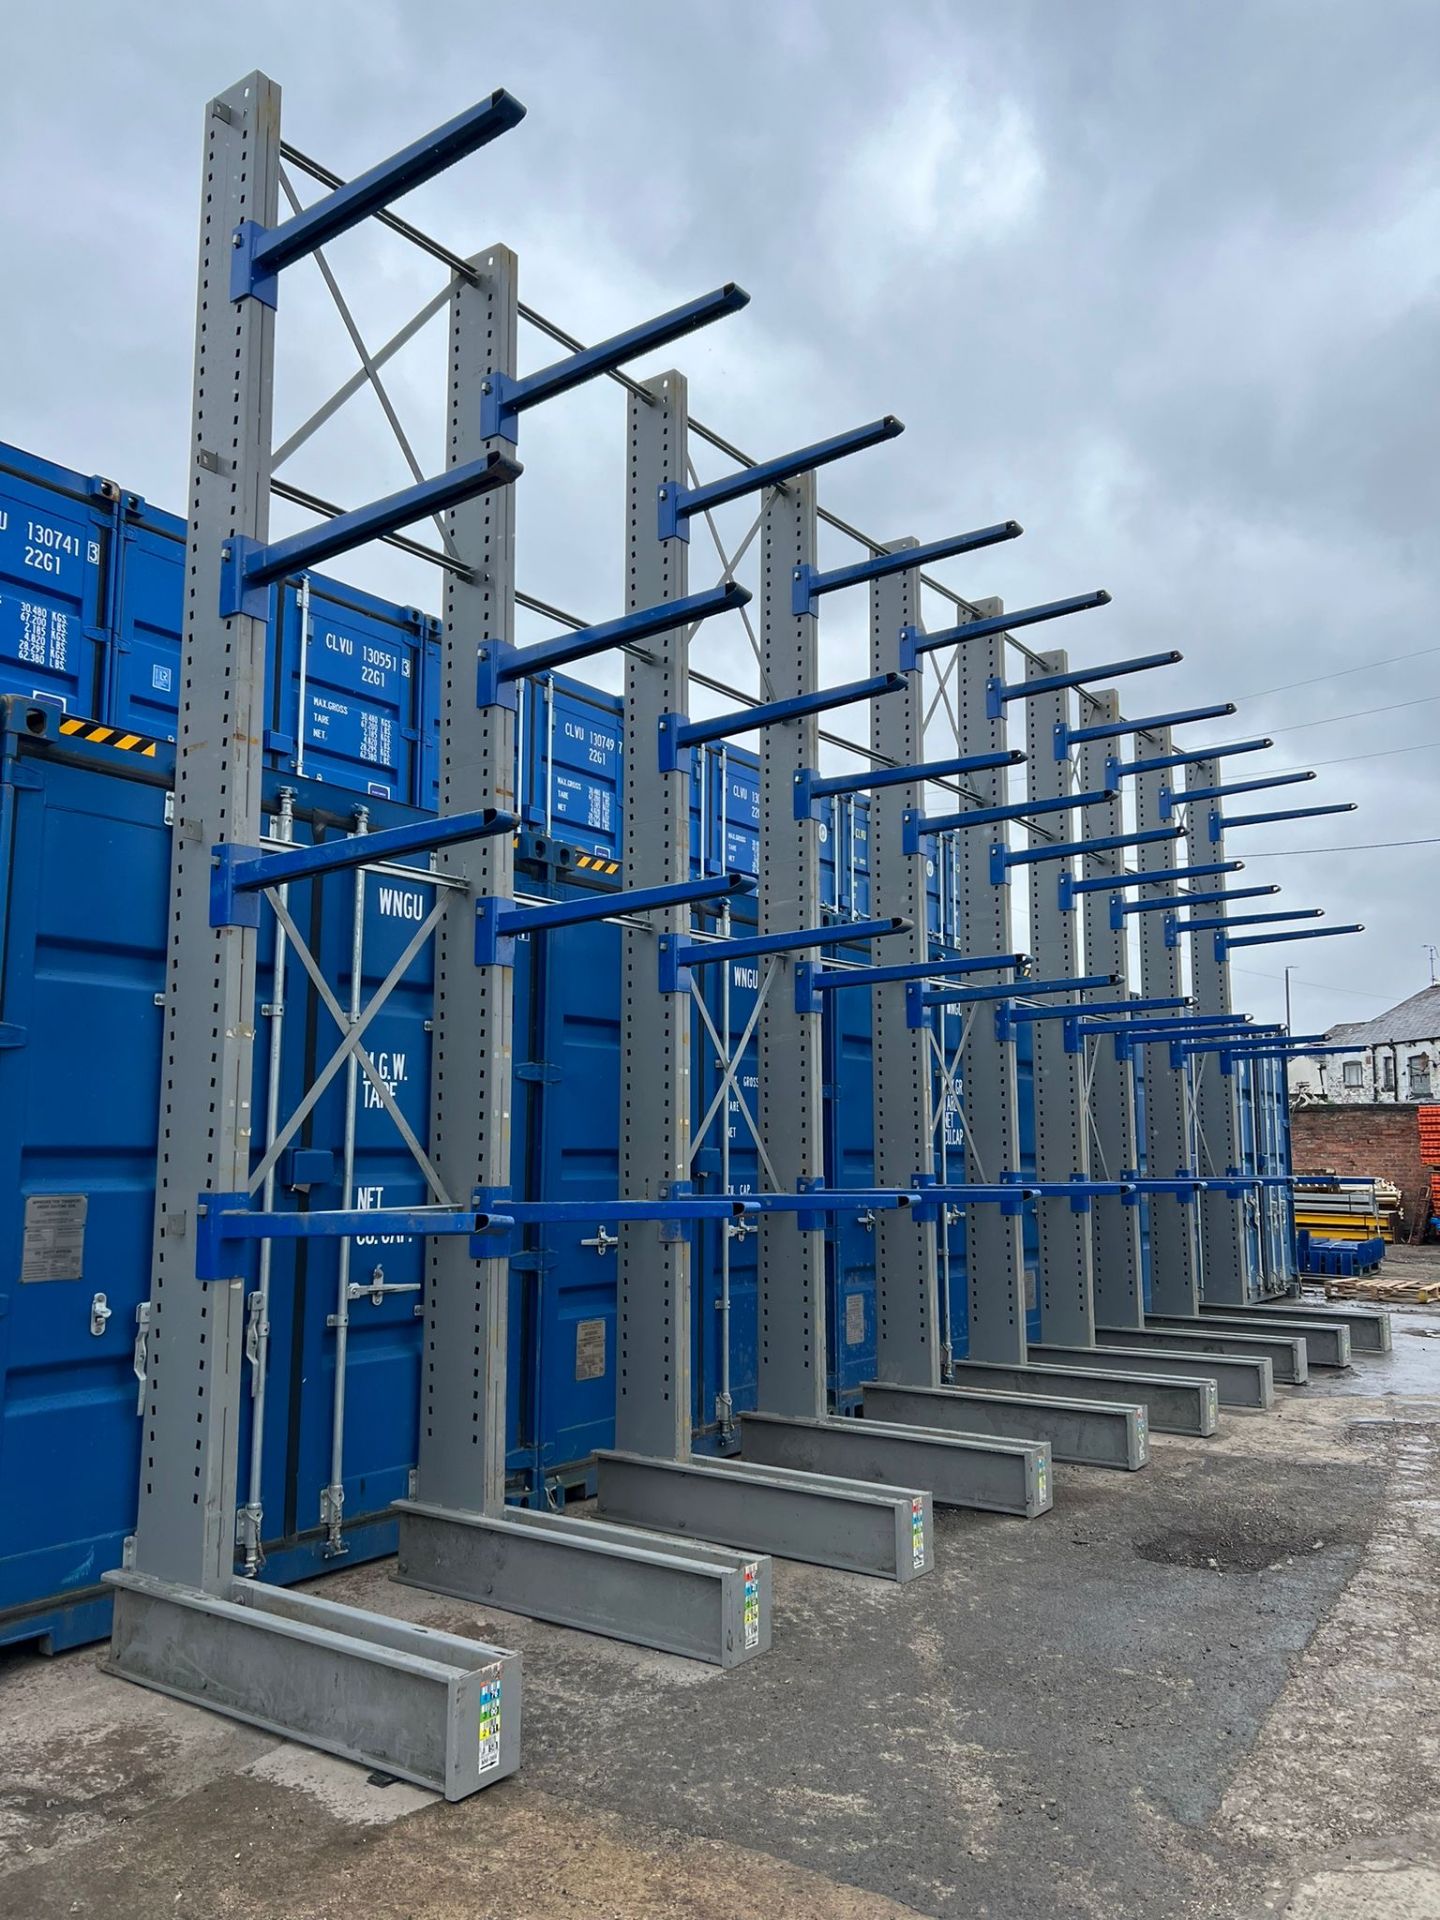 5m HIGH SINGLE CANTILEVER RACK. Including nine joined bays creating a 10m run, four arms per side